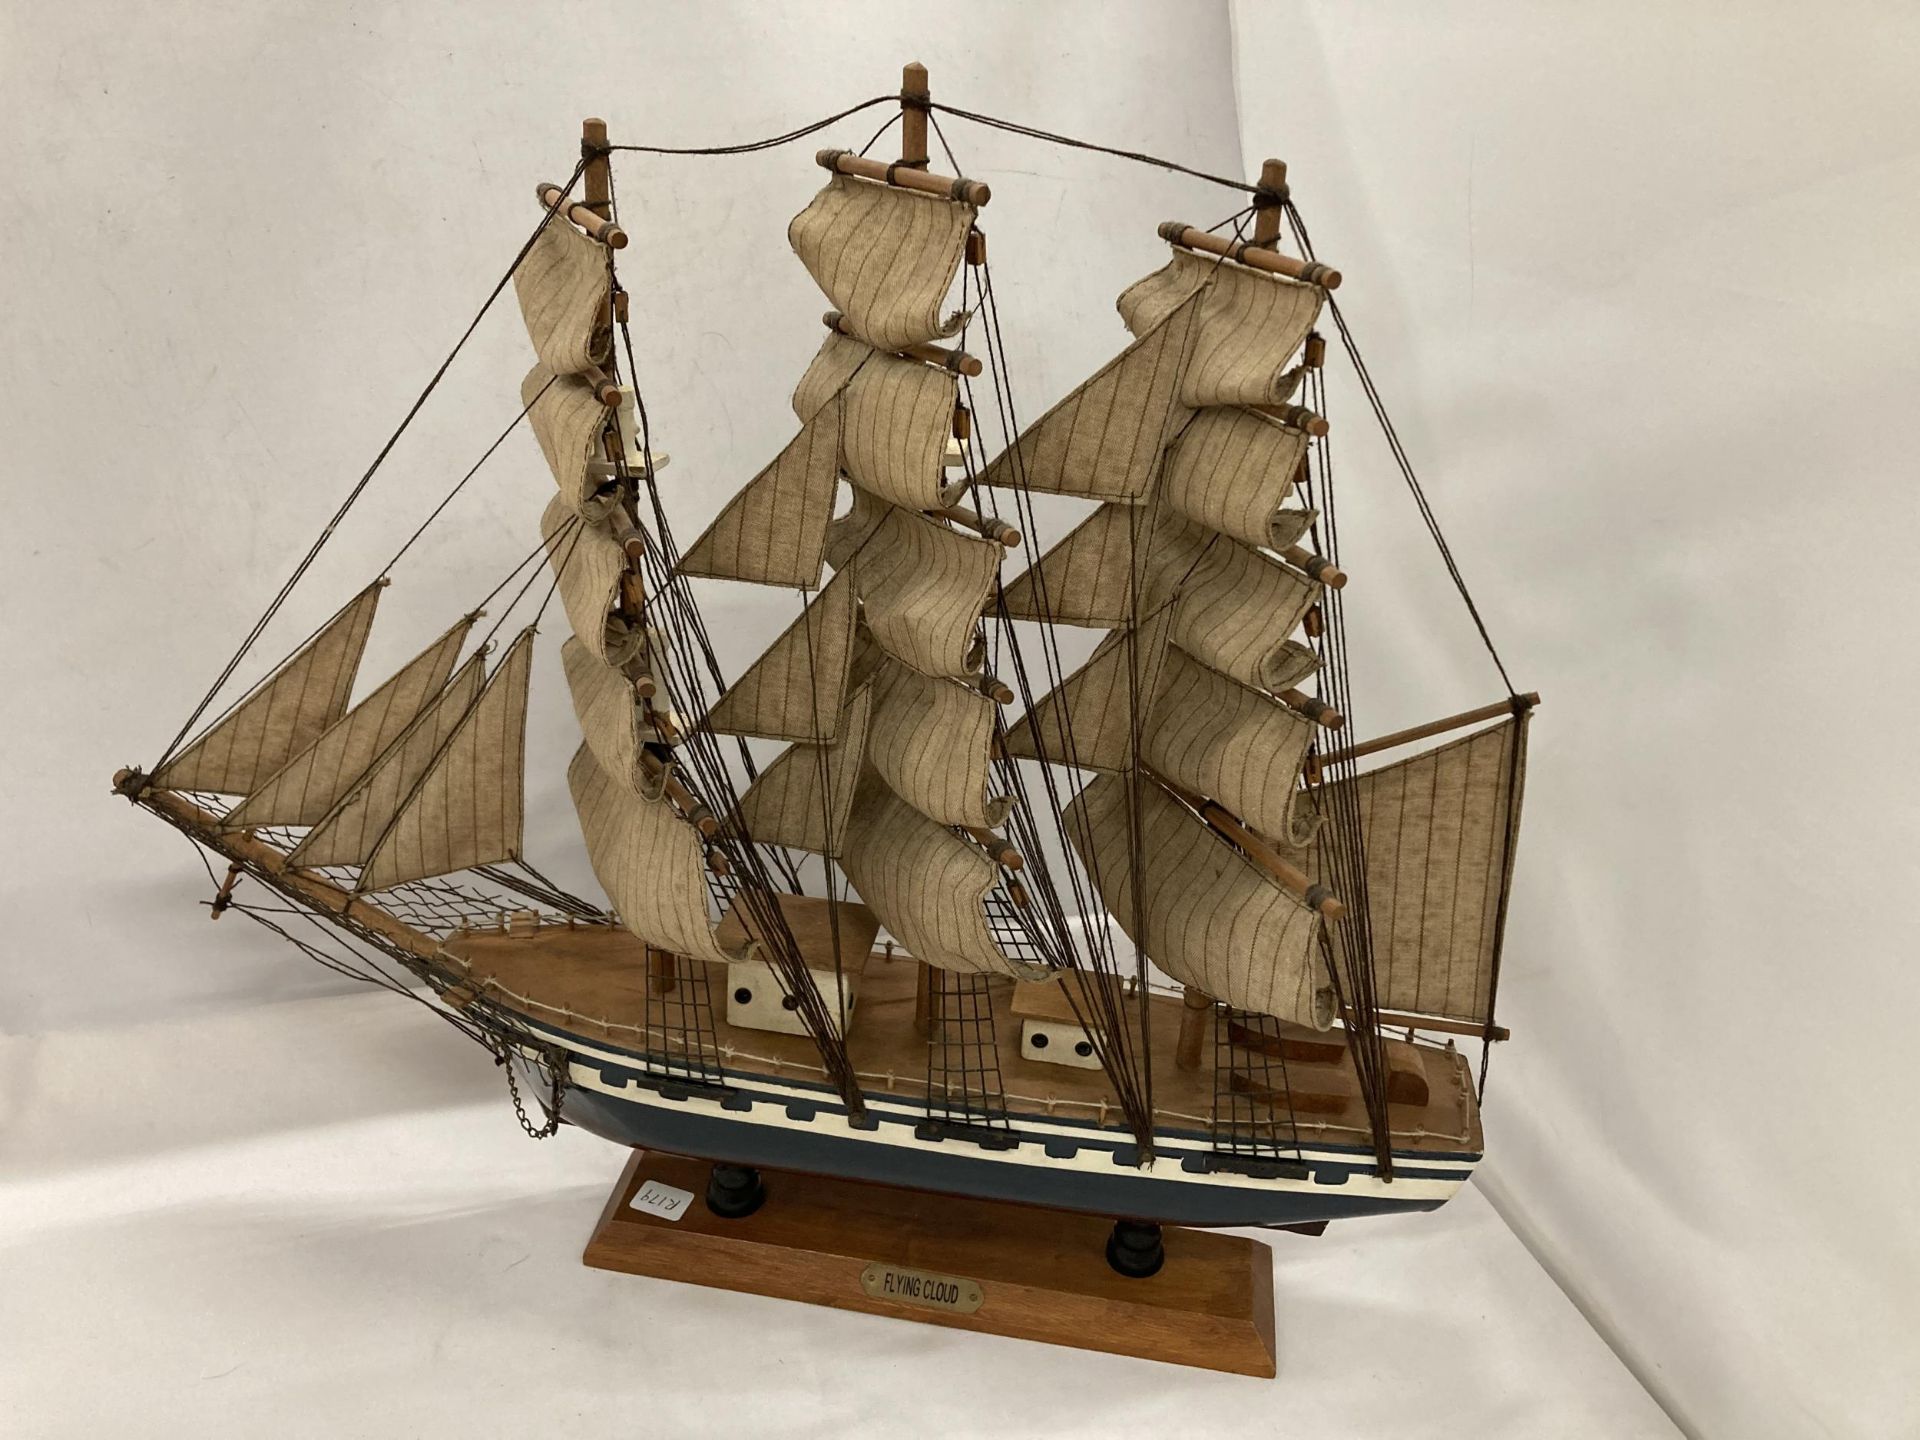 TWO WOODEN MODELS OF SAILING SHIPS, HEIGHTS 45CM AND 35CM, LENGTHS 51CM AND 35CM - Image 3 of 7